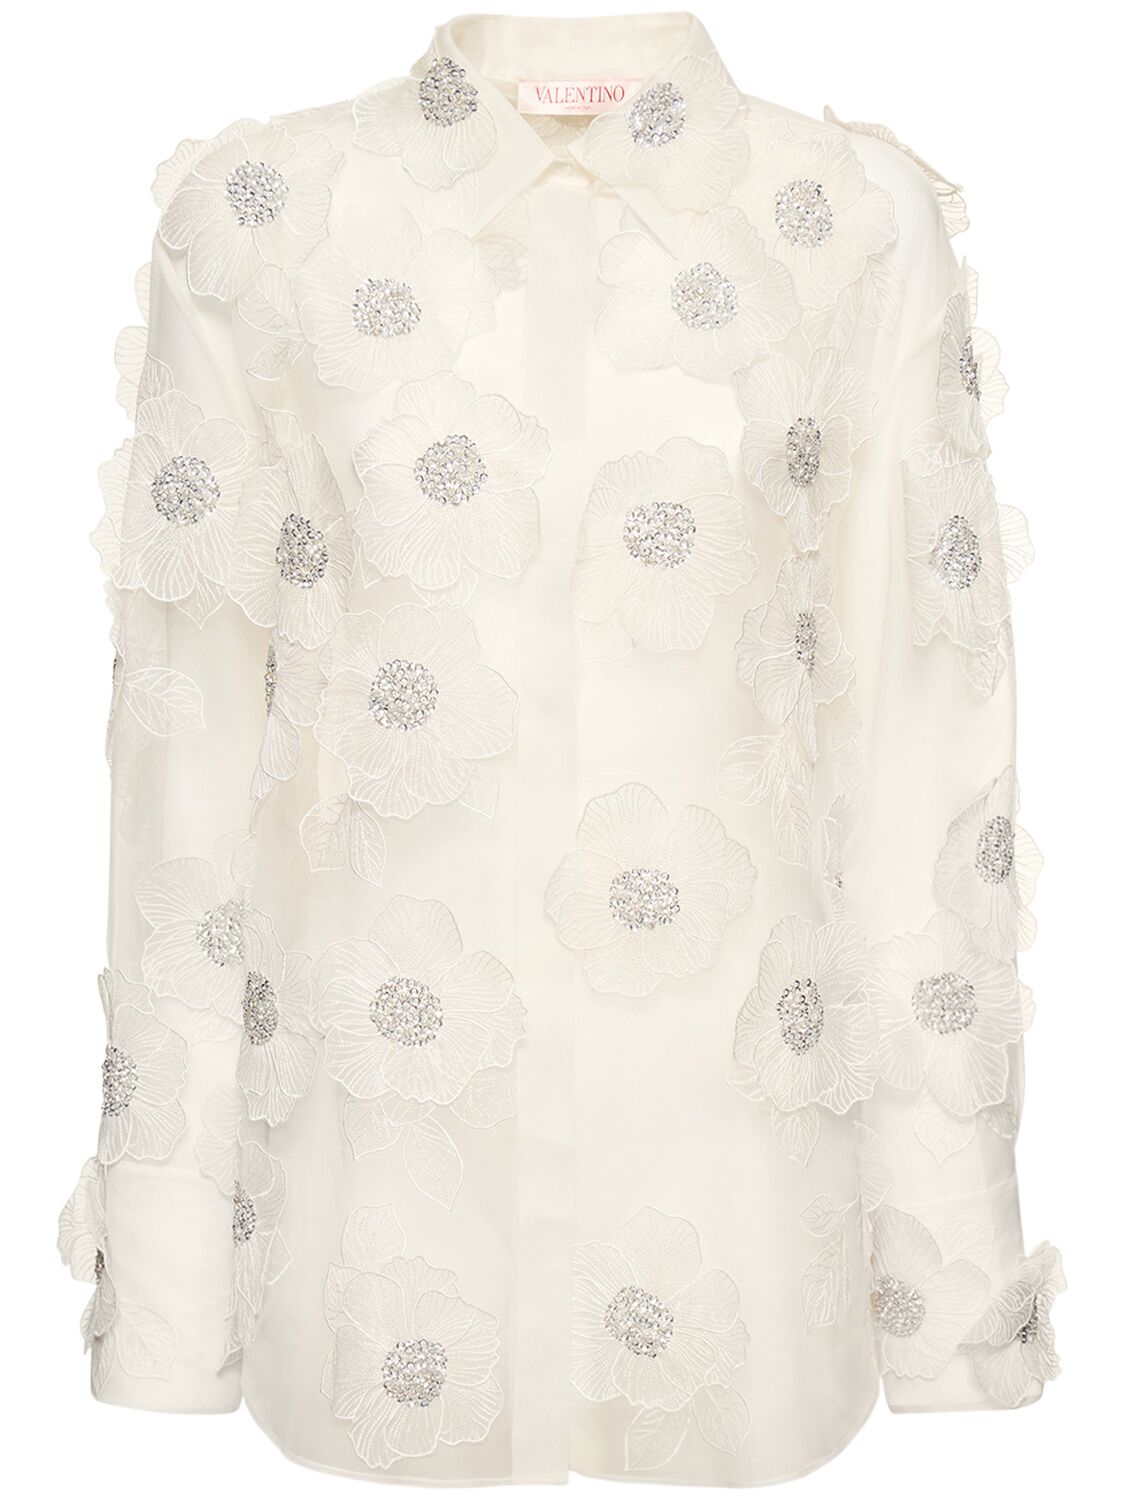 Image of Embroidered Organza Shirt